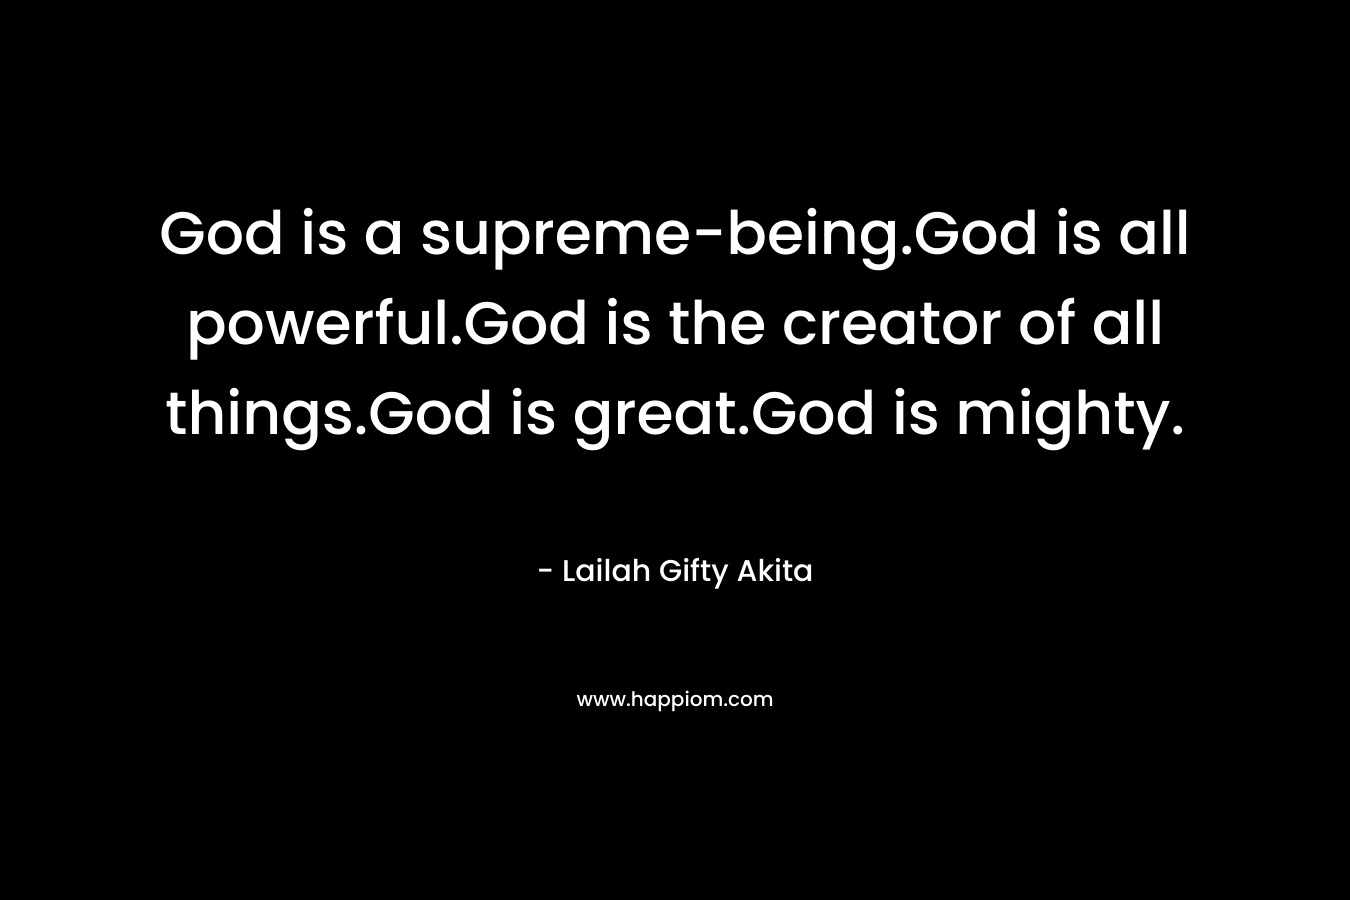 God is a supreme-being.God is all powerful.God is the creator of all things.God is great.God is mighty.